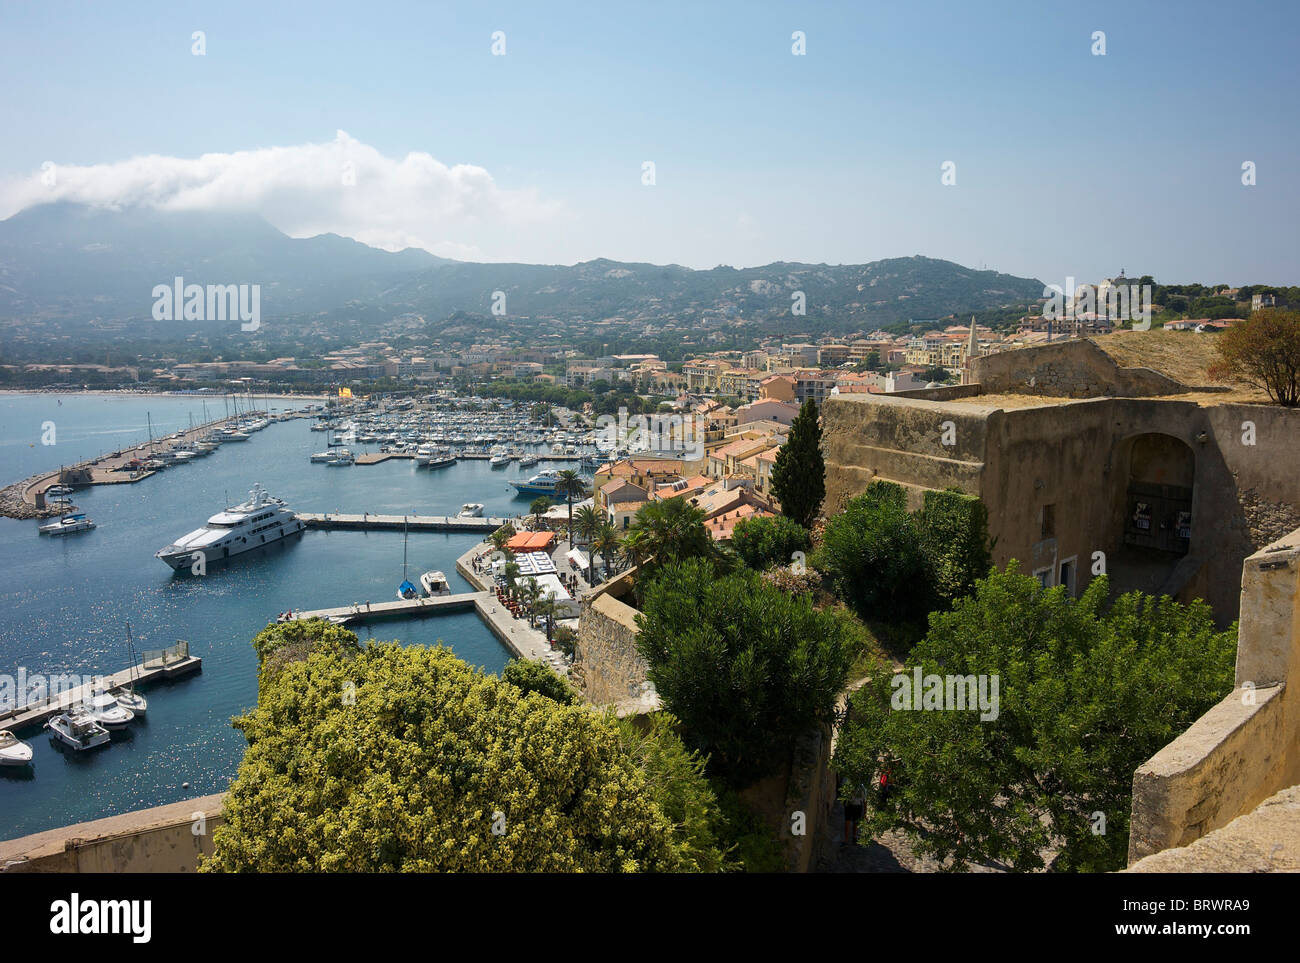 View of Calvi harbour from the Citadel with the mountains in the distance. Stock Photo